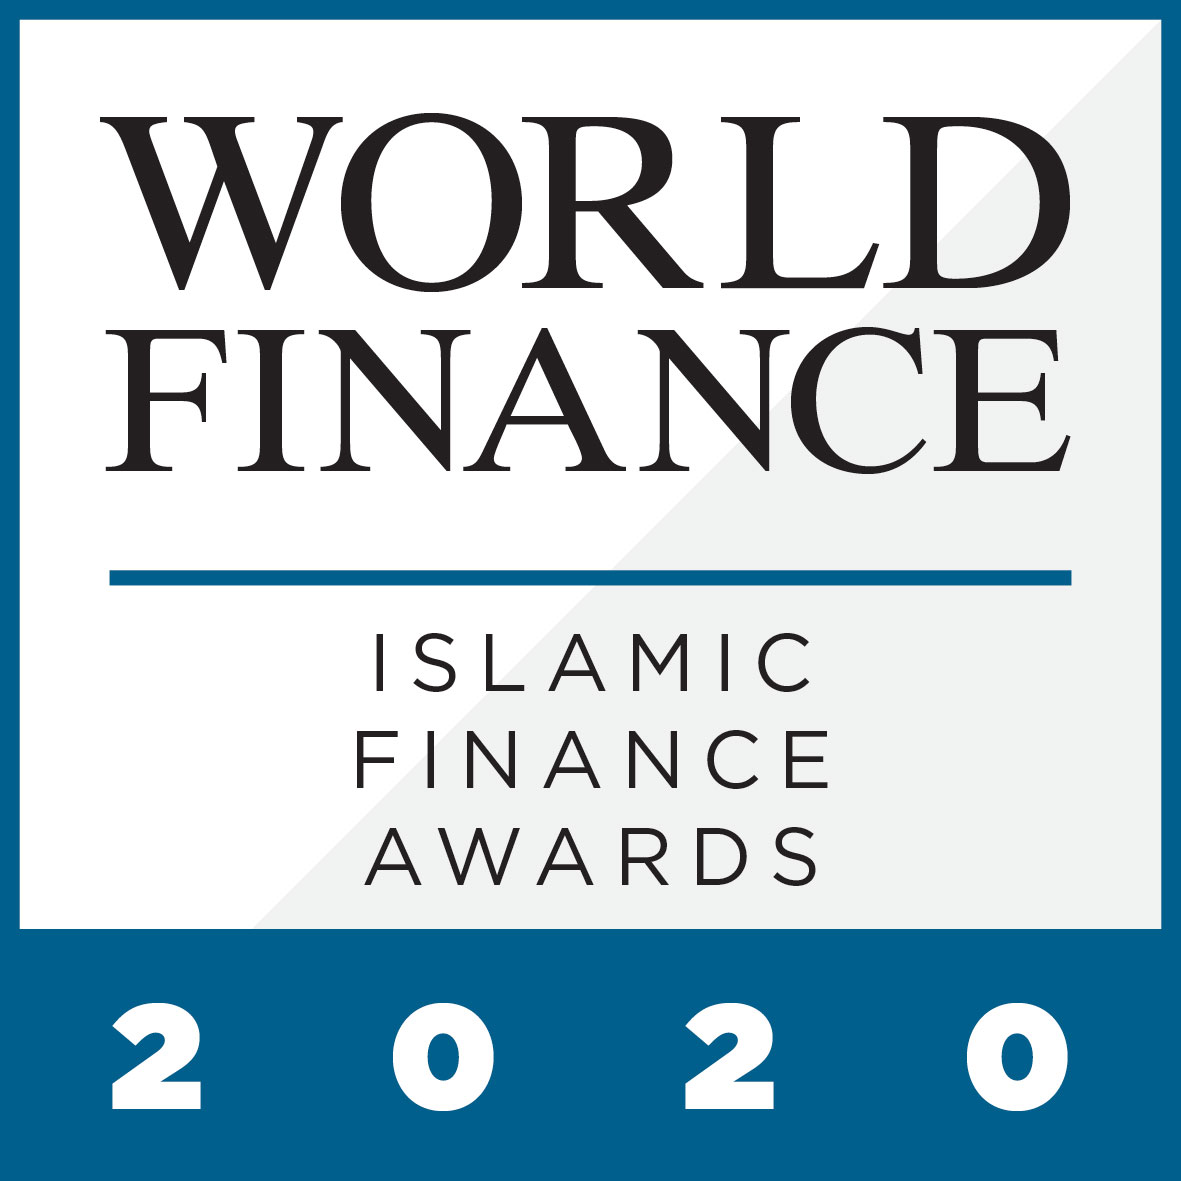 Although Islamic banking continues to show solid growth, there has been some turbulence. The World Finance Islamic Finance Awards 2020 showcase the firms looking to the future by broadening their appeal